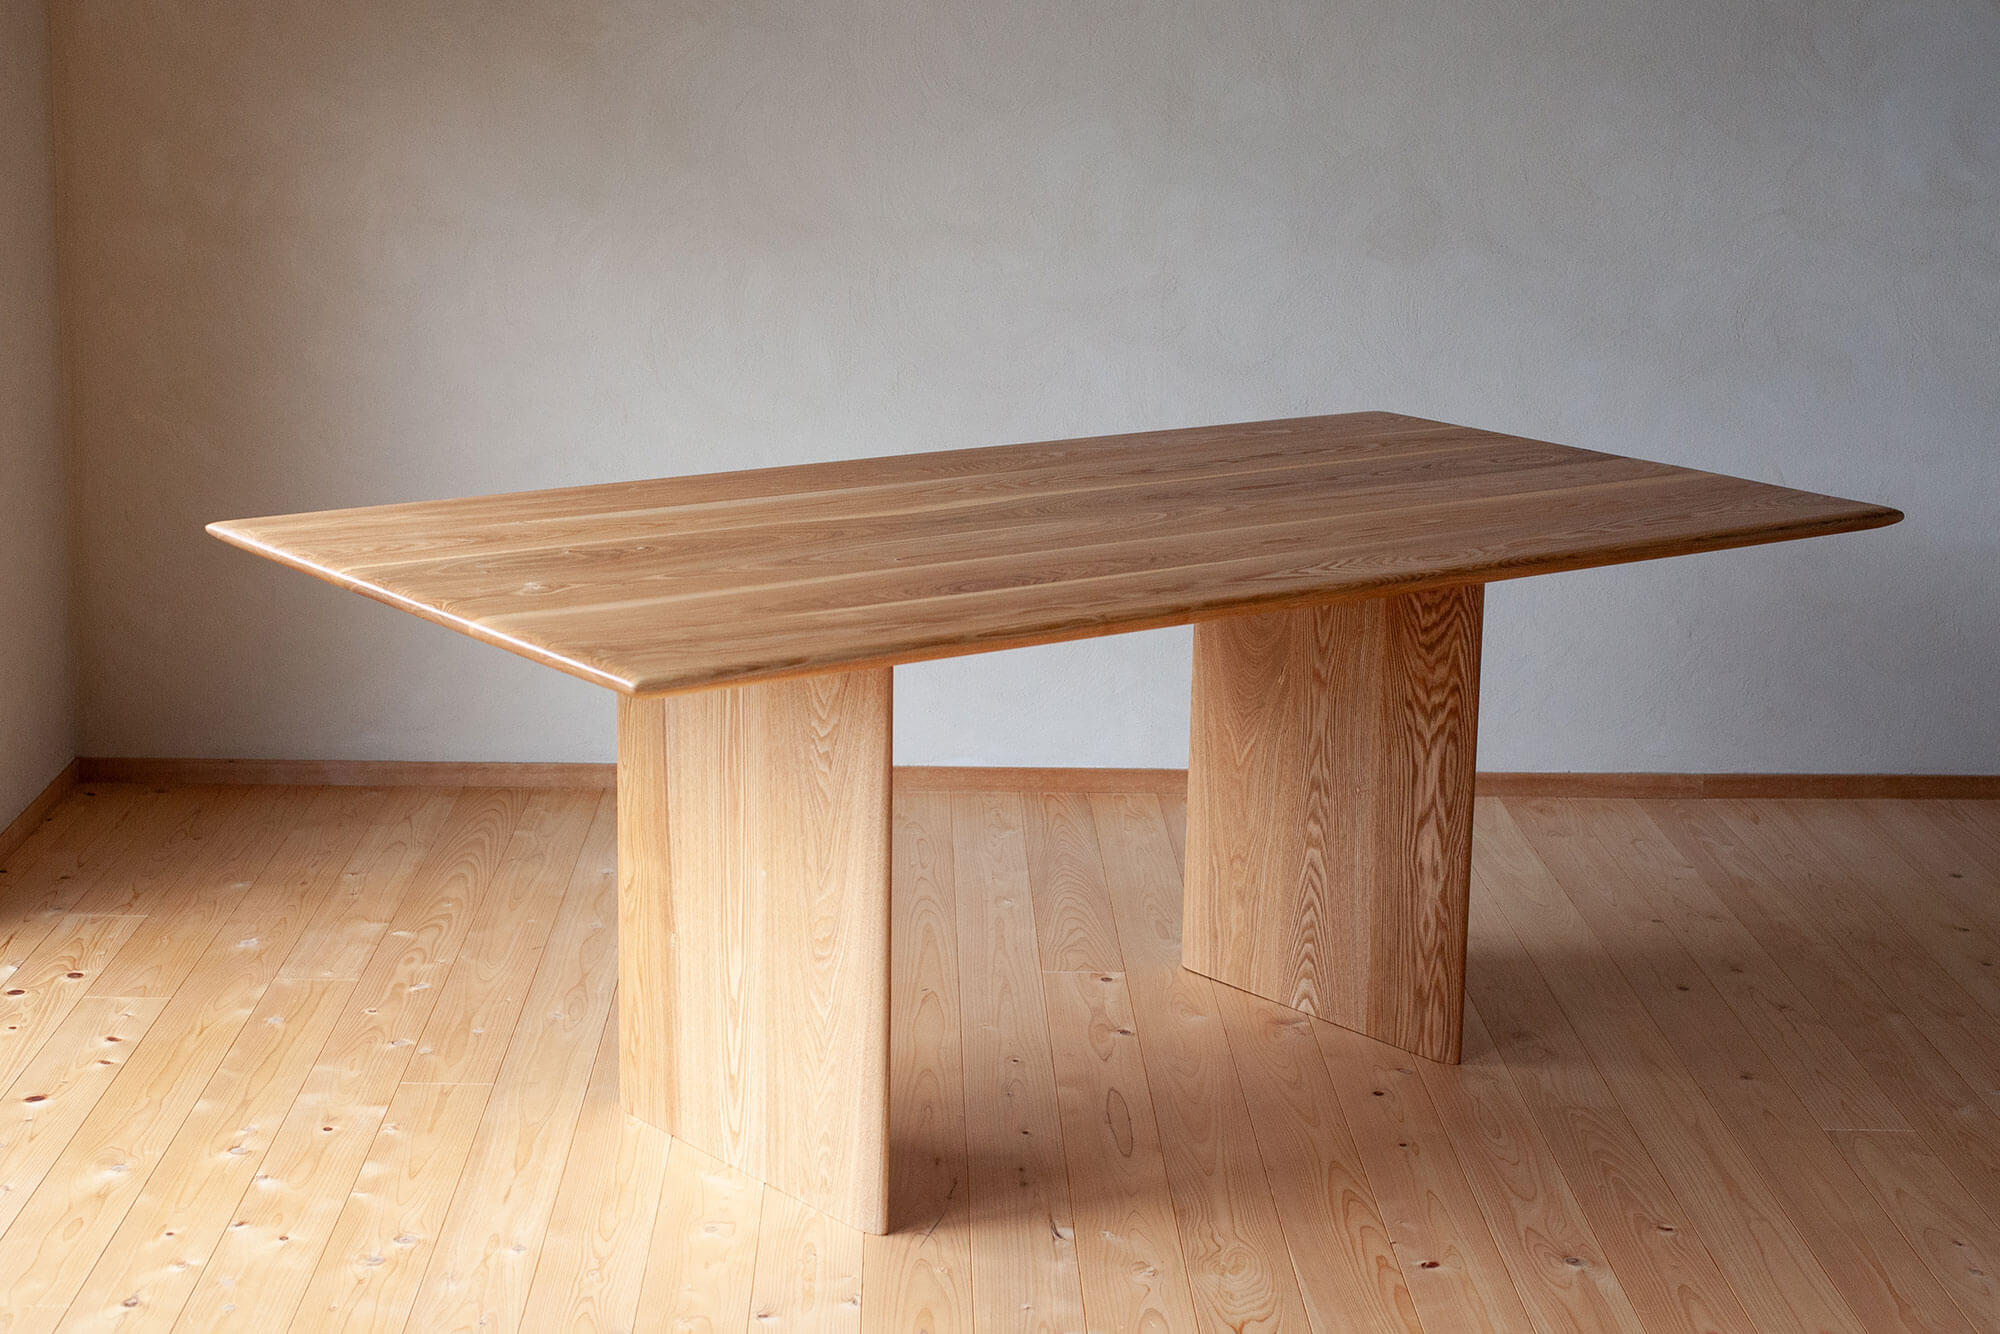 The Table 001